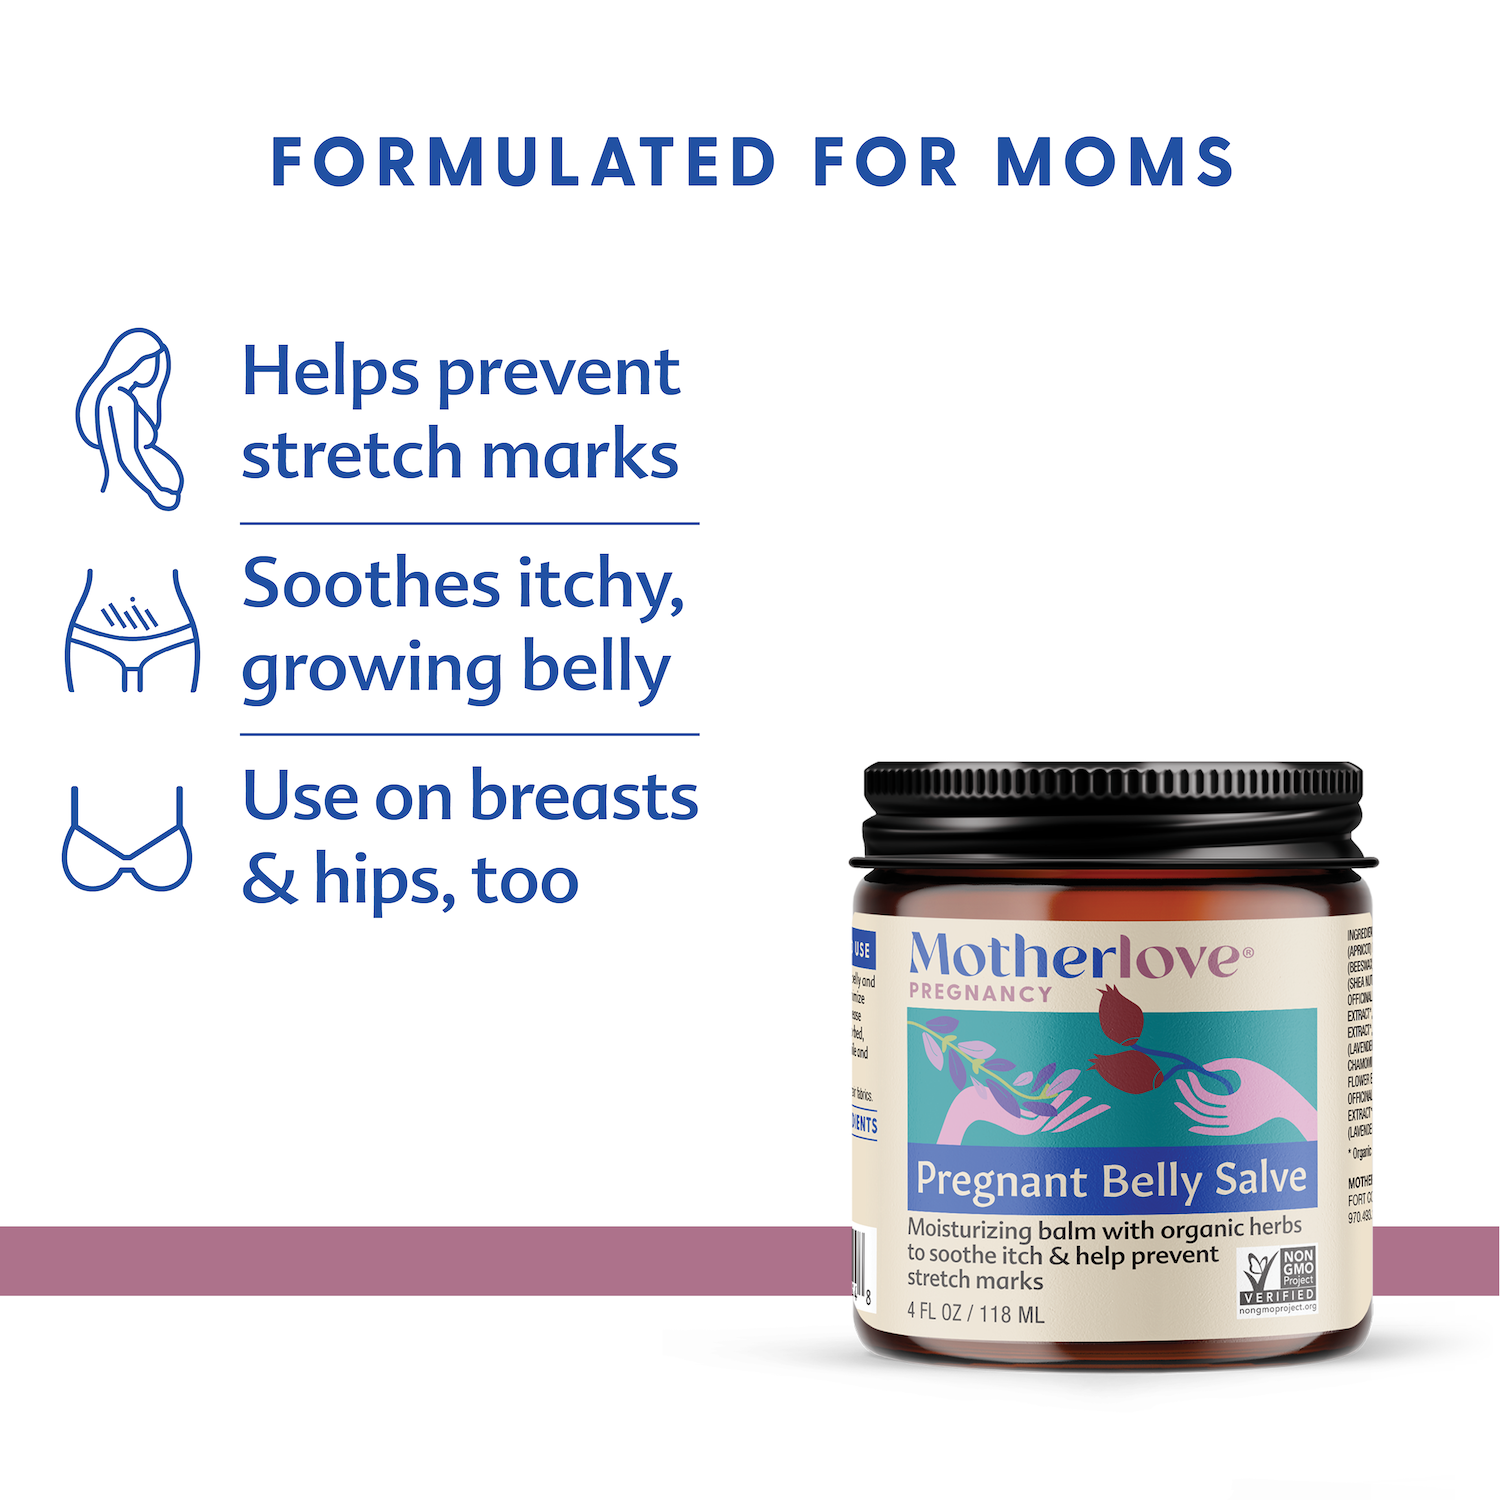 picture of a jar of motherlove pregnant belly salve that is formulated for moms as it helps prevent stretch marks, soothes itcy growing belly, use on breasts and hips too